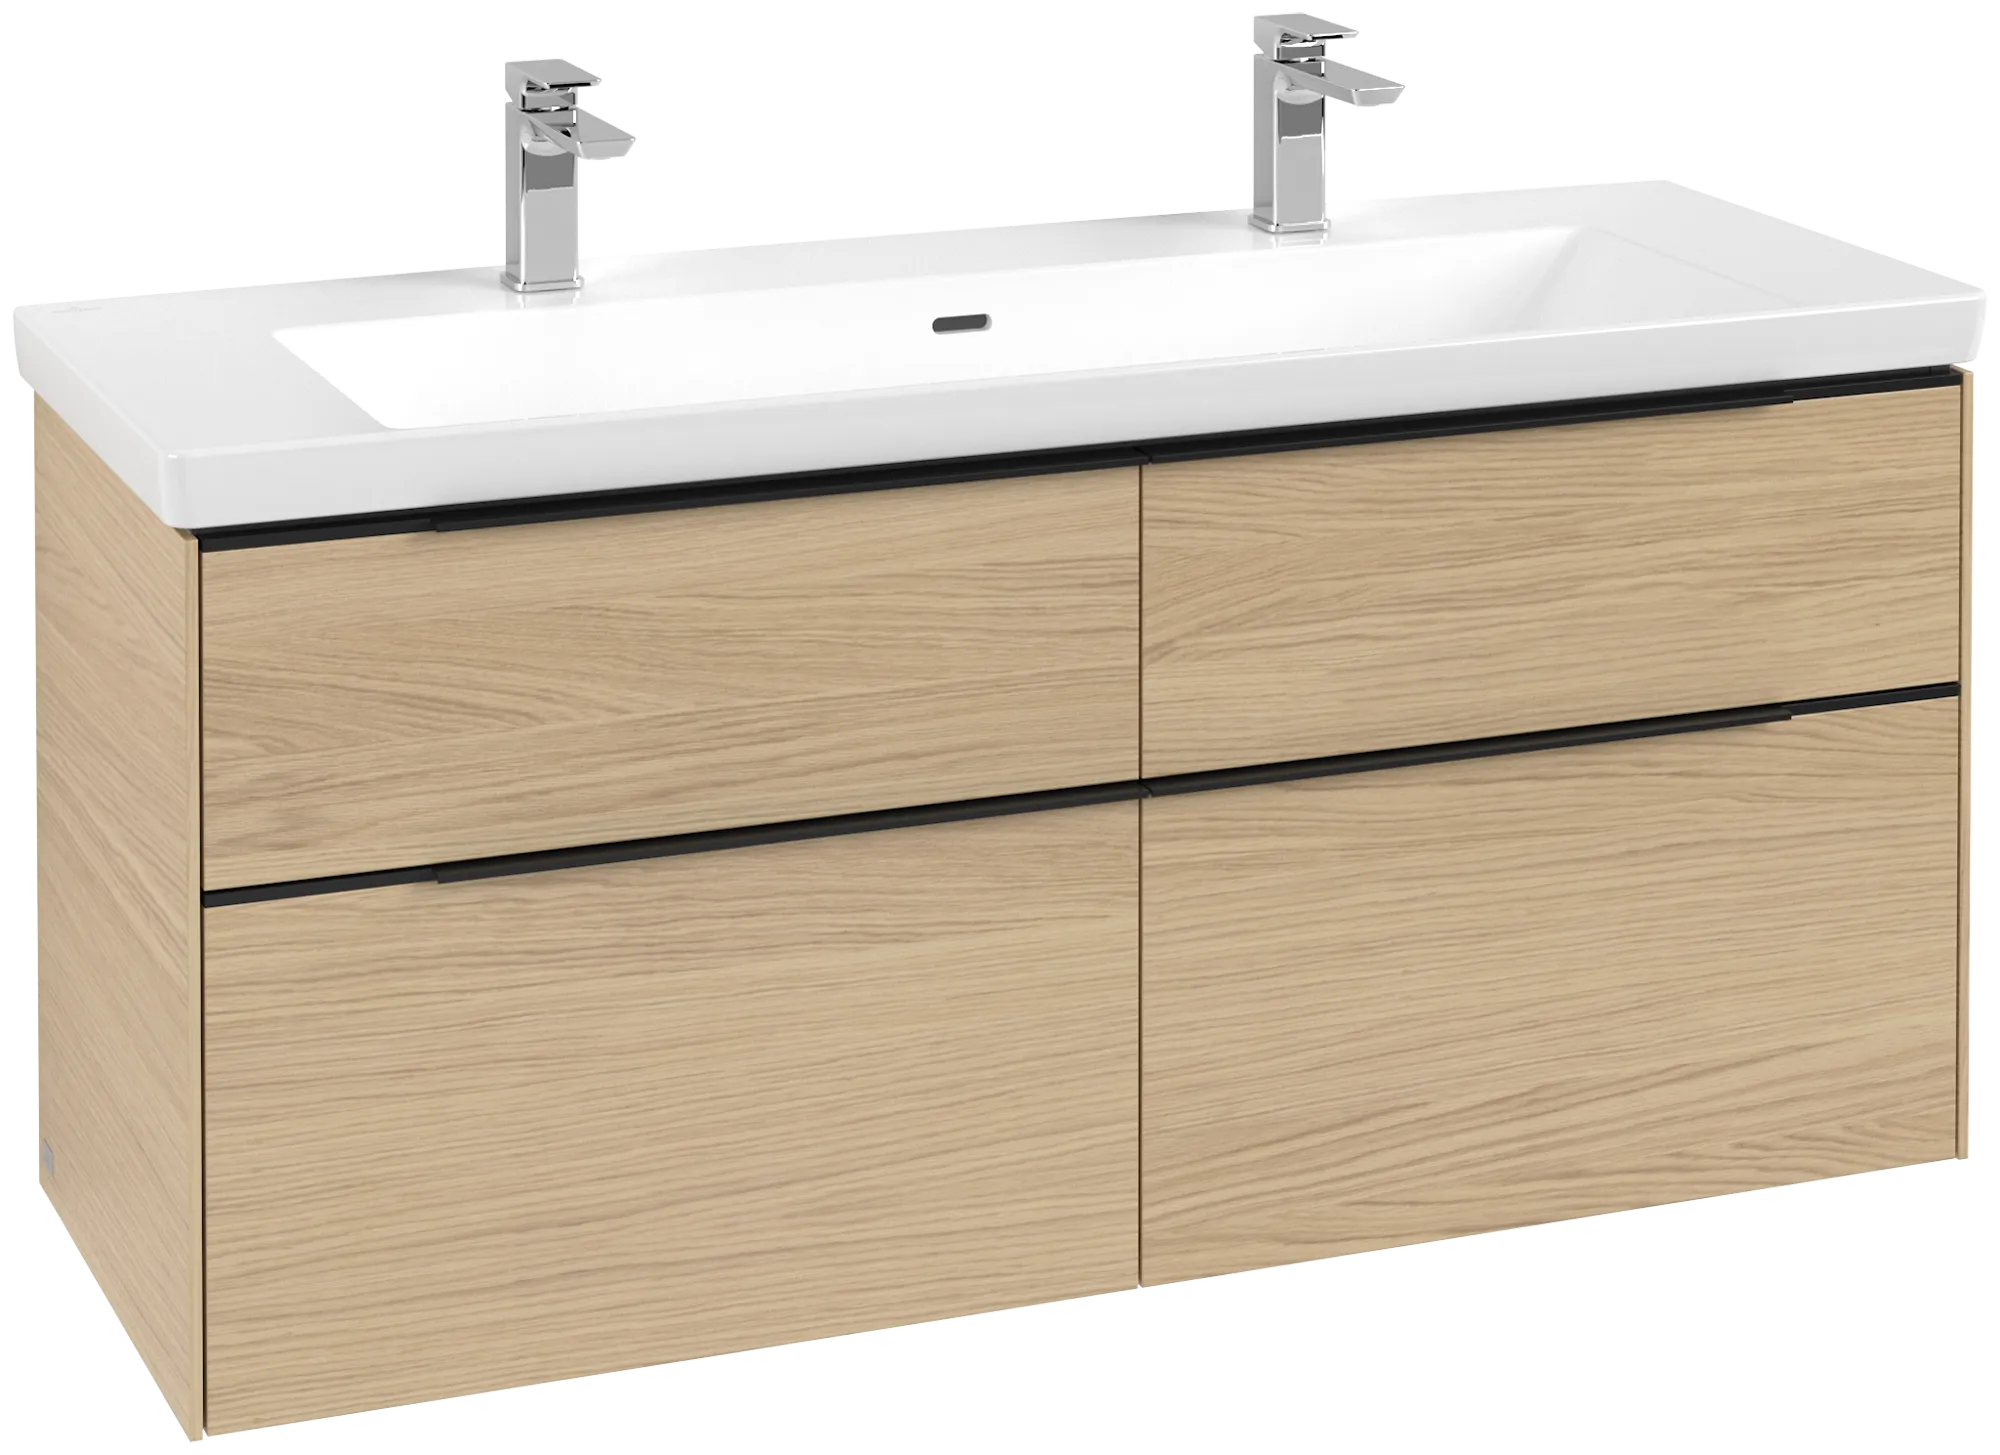 VILLEROY BOCH Subway 3.0 Vanity unit, with lighting, 4 pull-out compartments, 1272 x 576 x 478 mm, Nordic Oak #C602L1VJ resmi